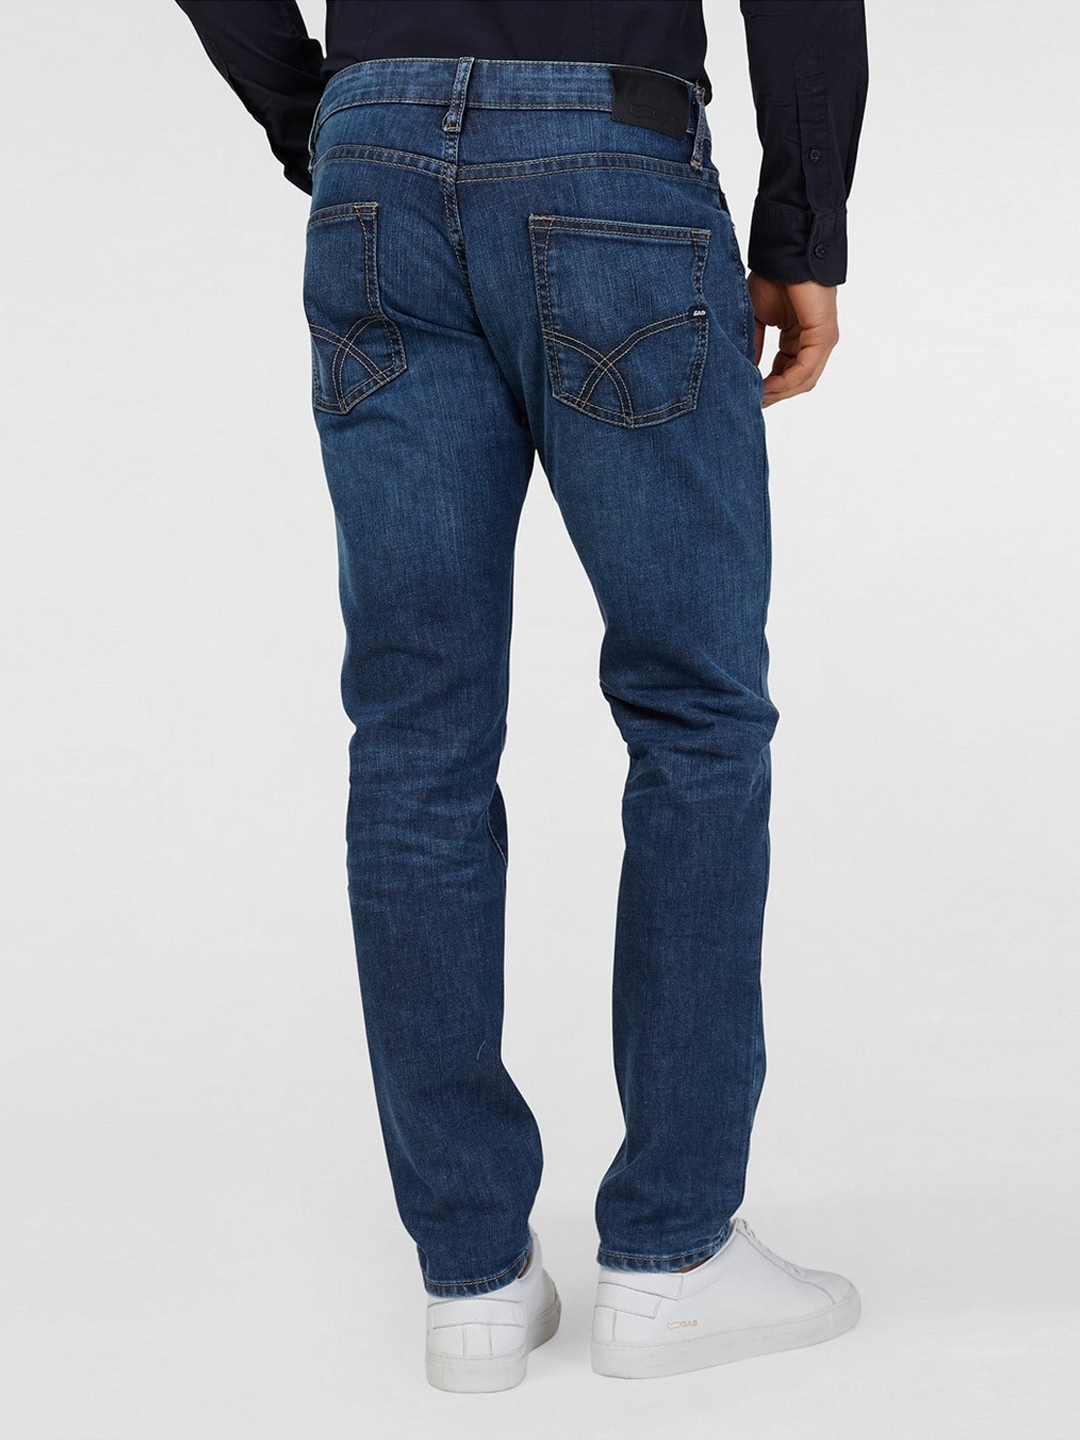 KETCH Men's Tapered Jeans (KHJN000252_Blue_32) : Amazon.in: Fashion